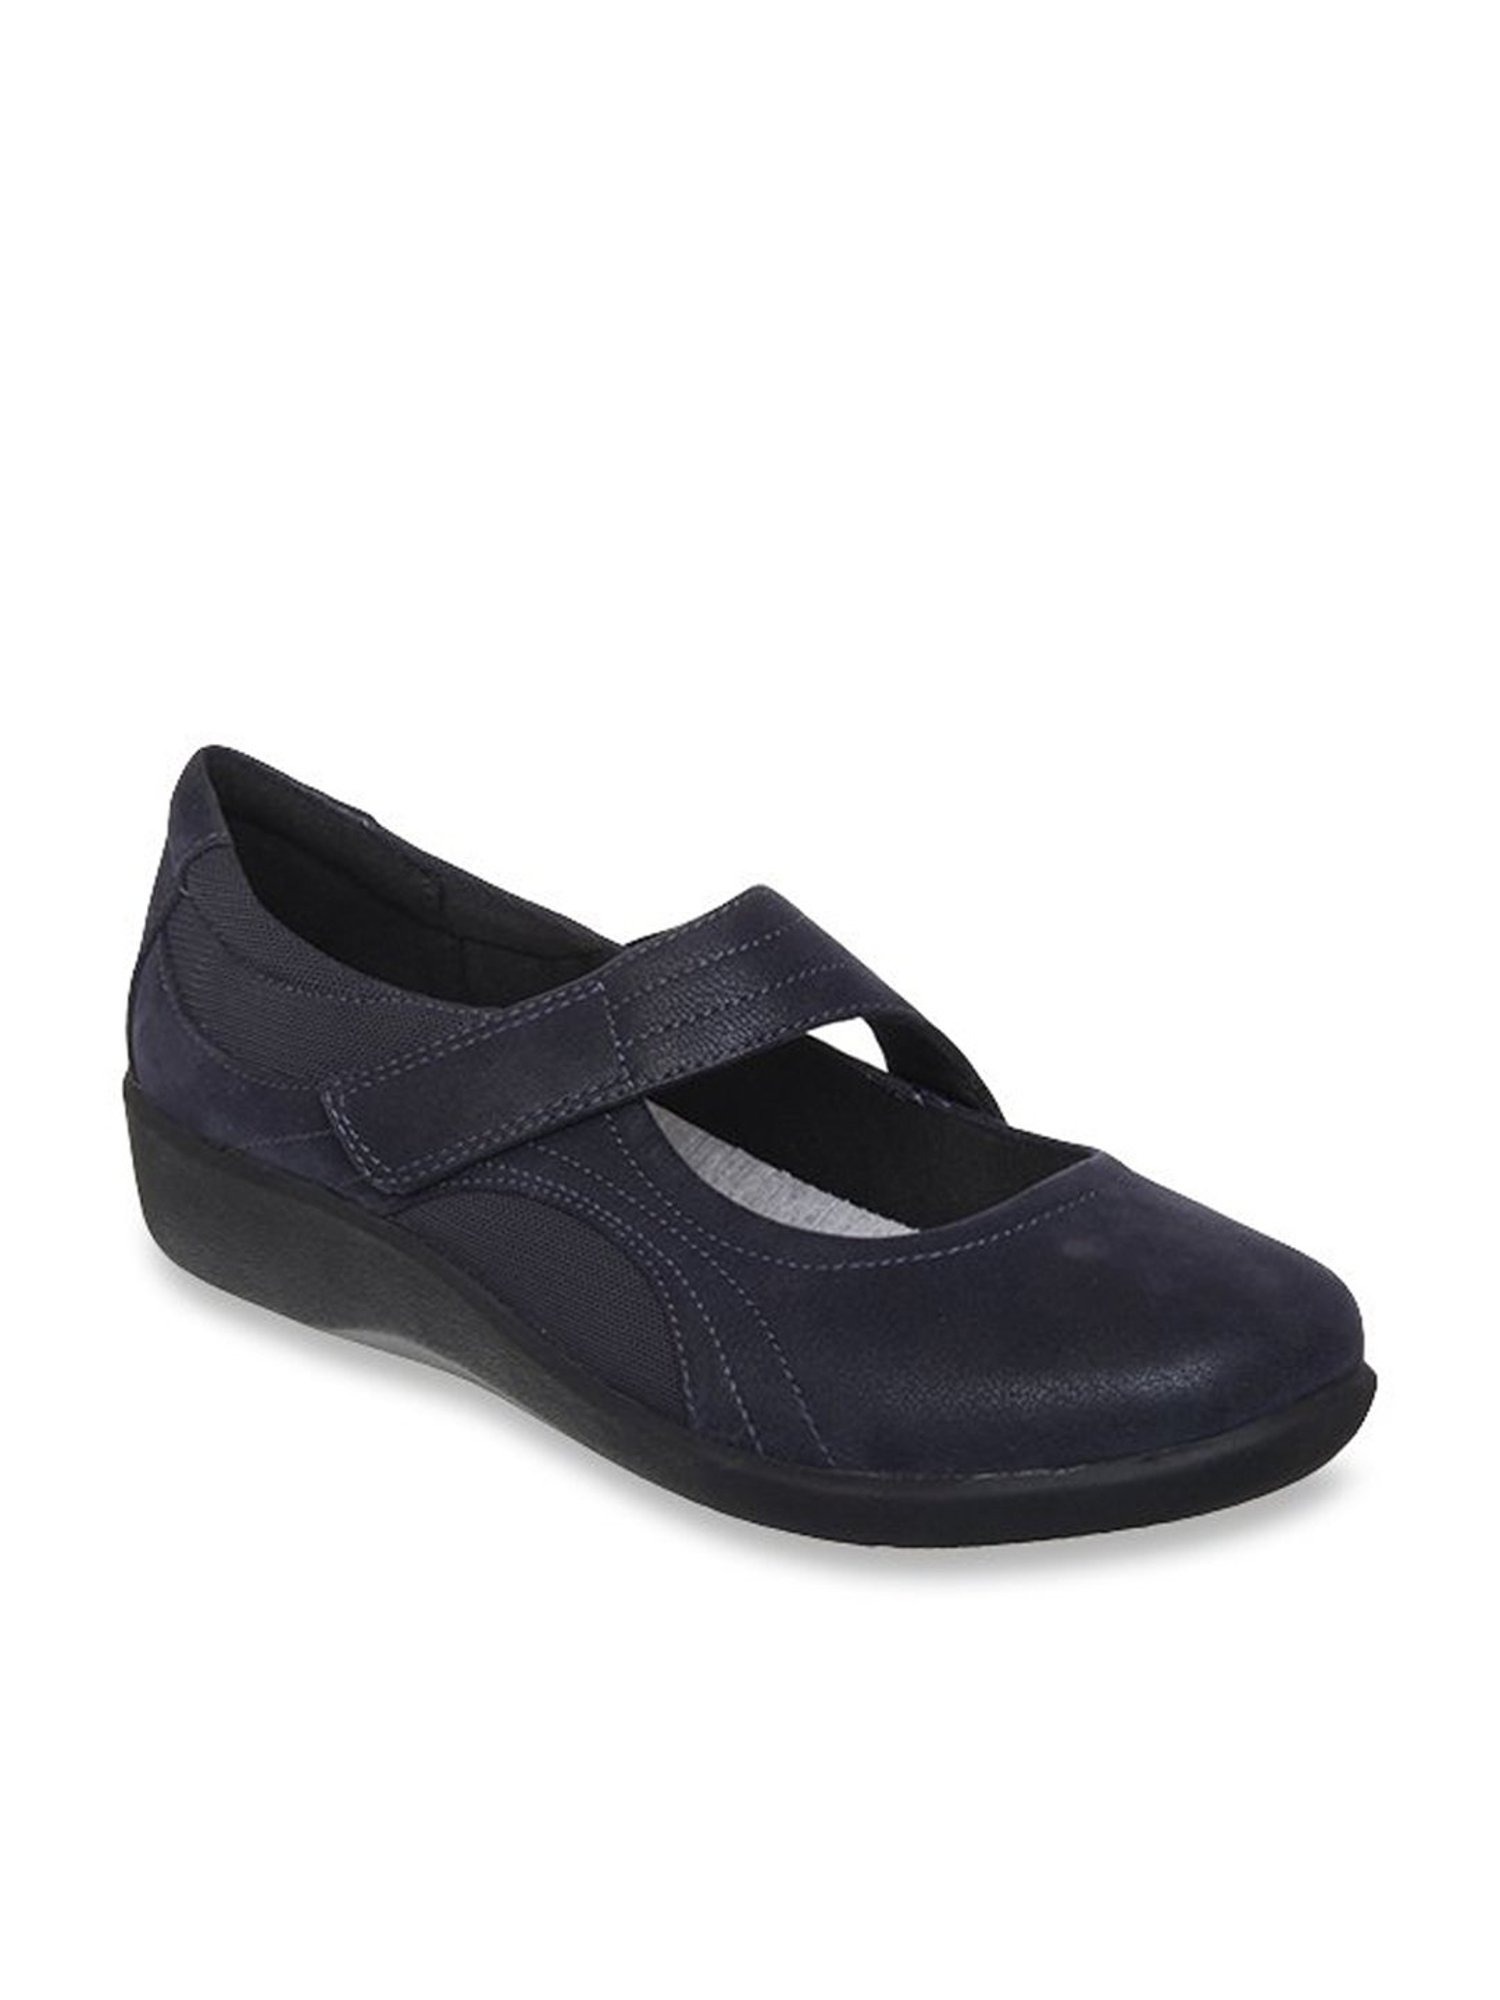 Nia Jnr Lilac Sandals by Clarks | Shop Online at Styletread NZ